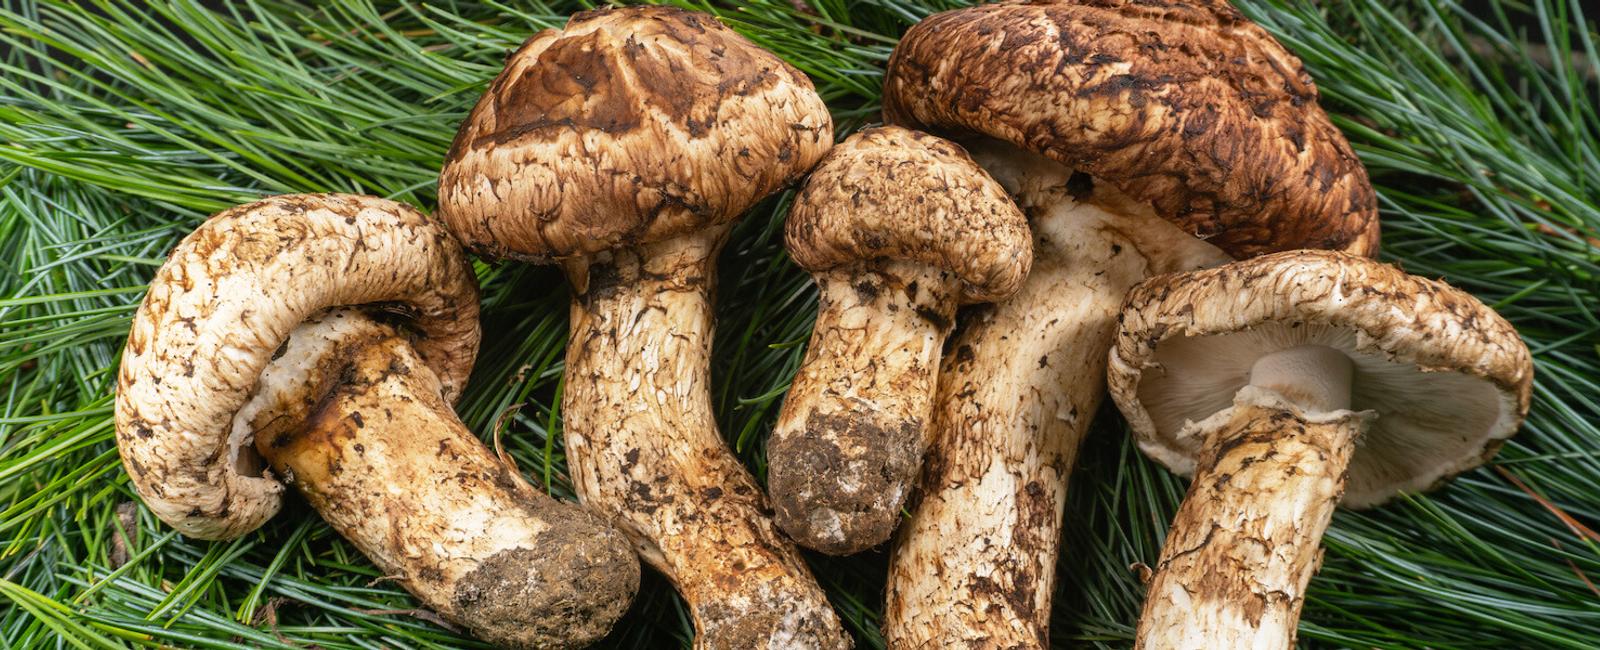 The Complete Guide to Songyi Mushrooms